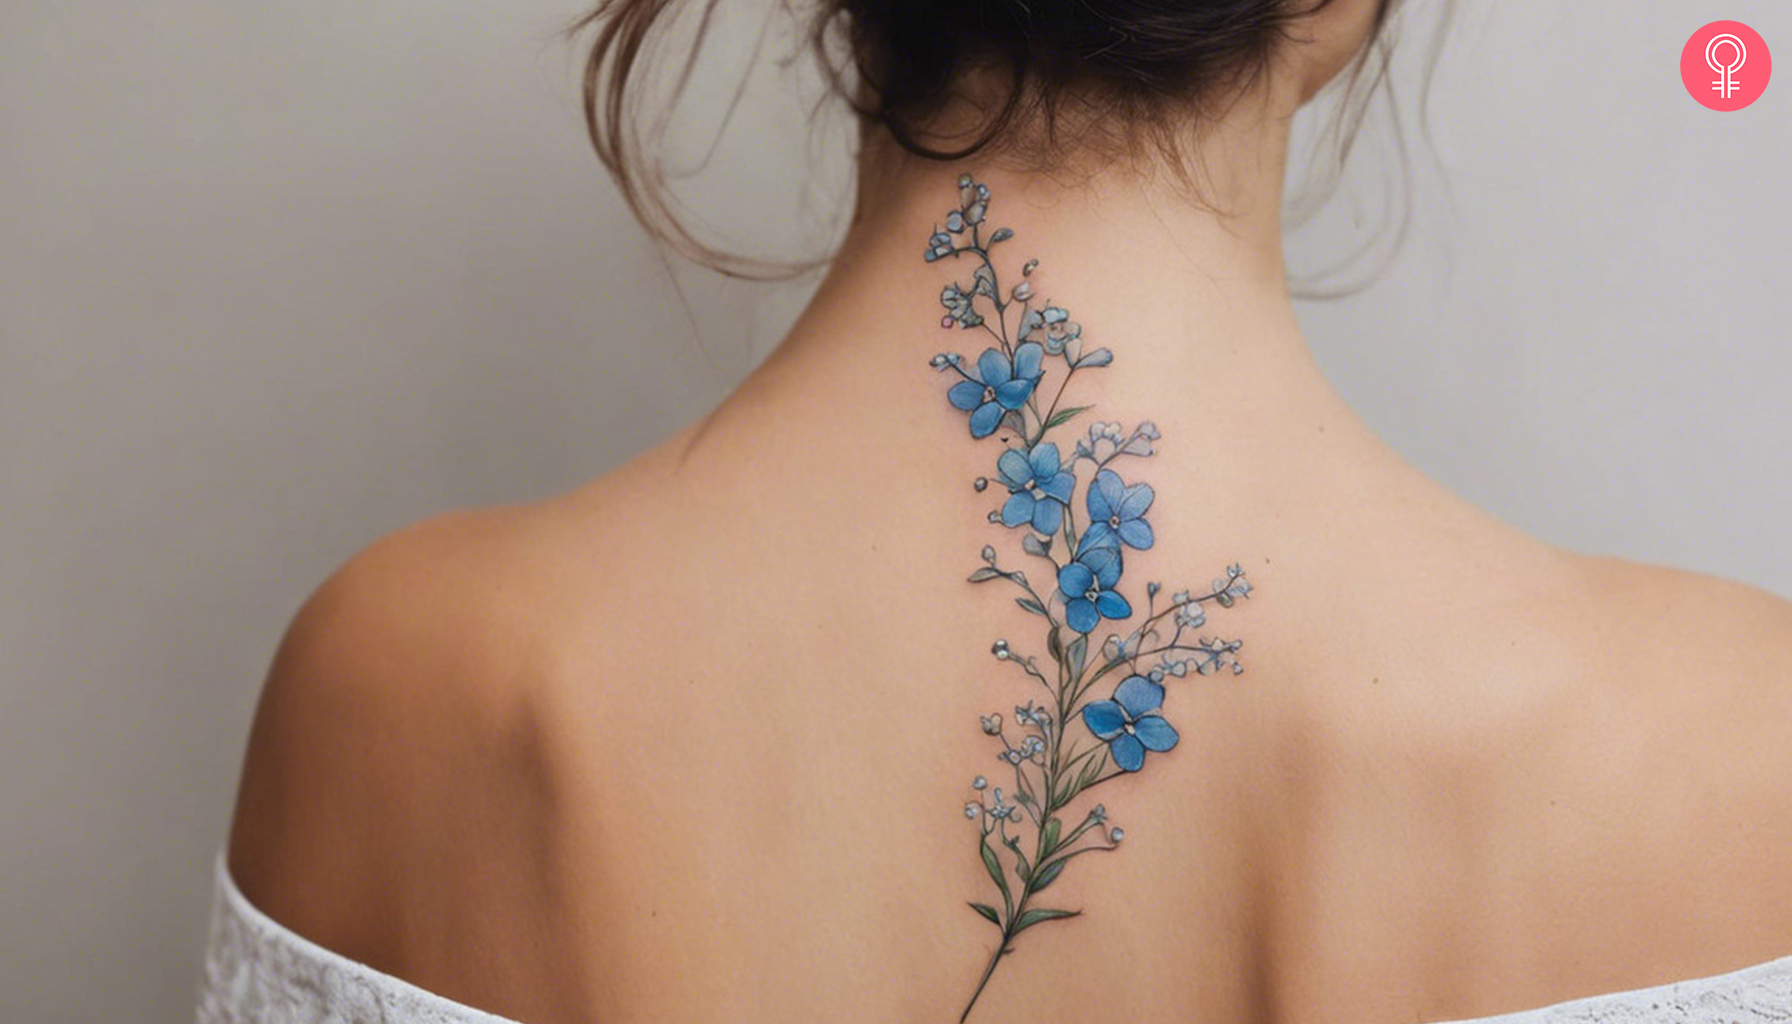 A tattoo featuring baby’s breath and forget-me-not